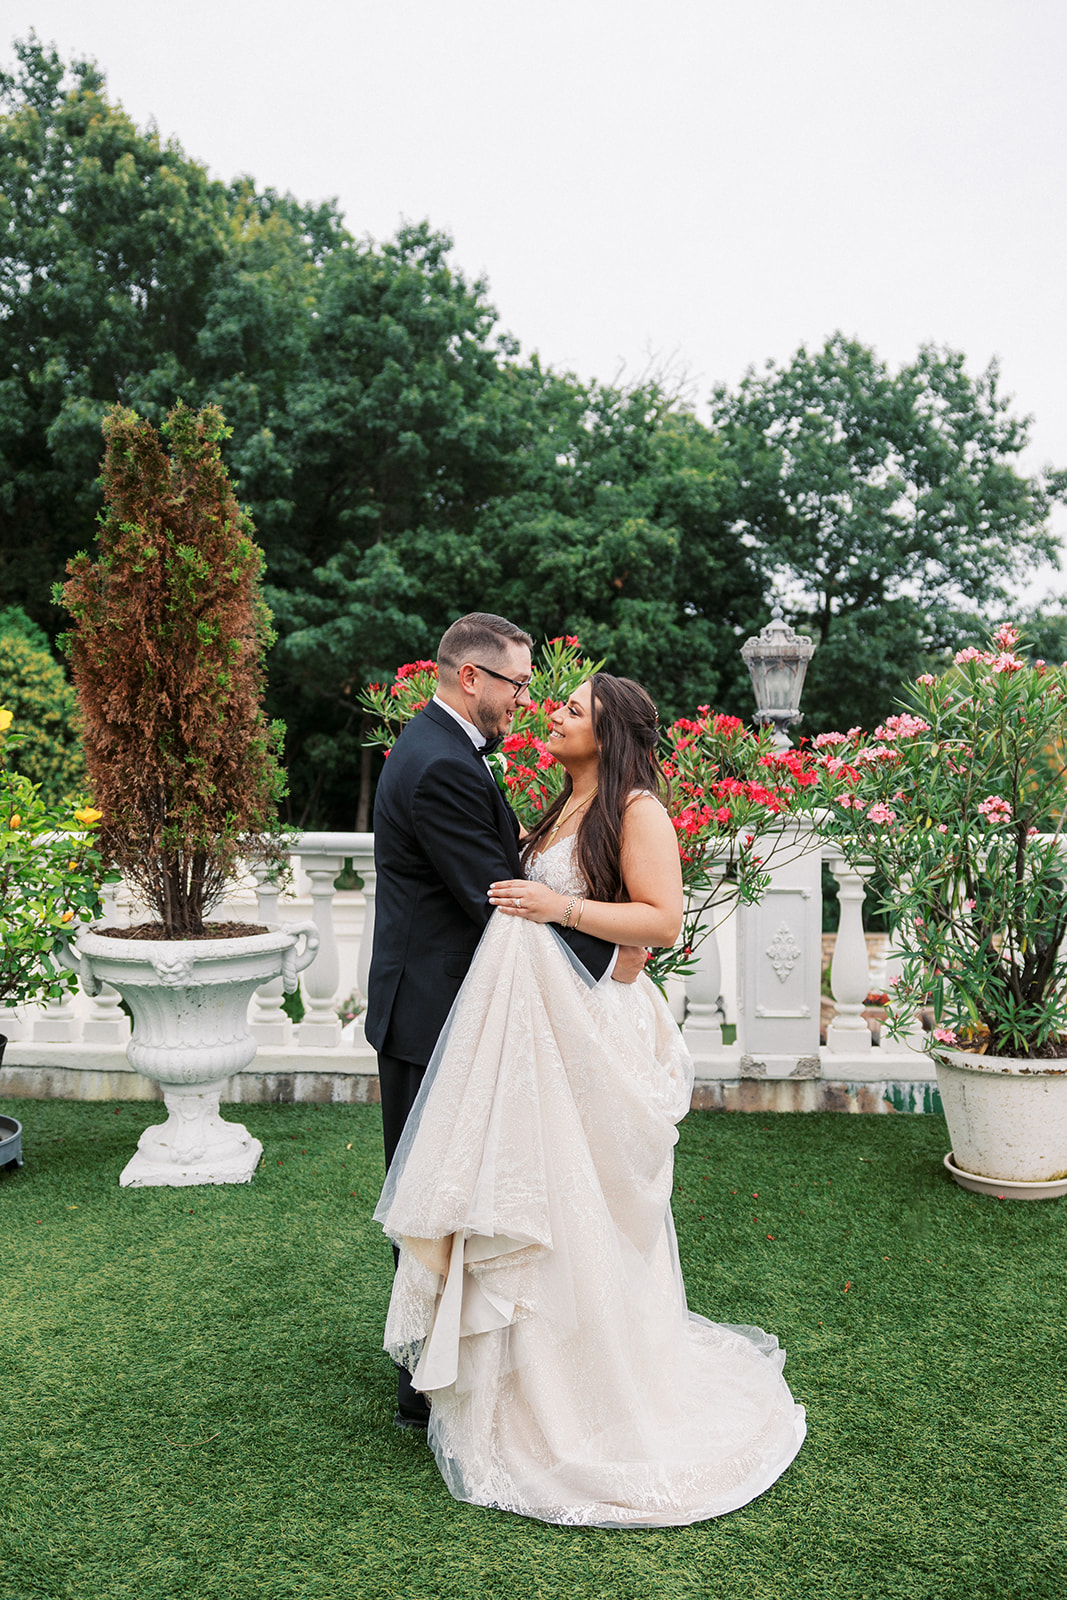 Newlyweds share a close intimate moment on a garden terrace Villa Barone Hilltop Manor